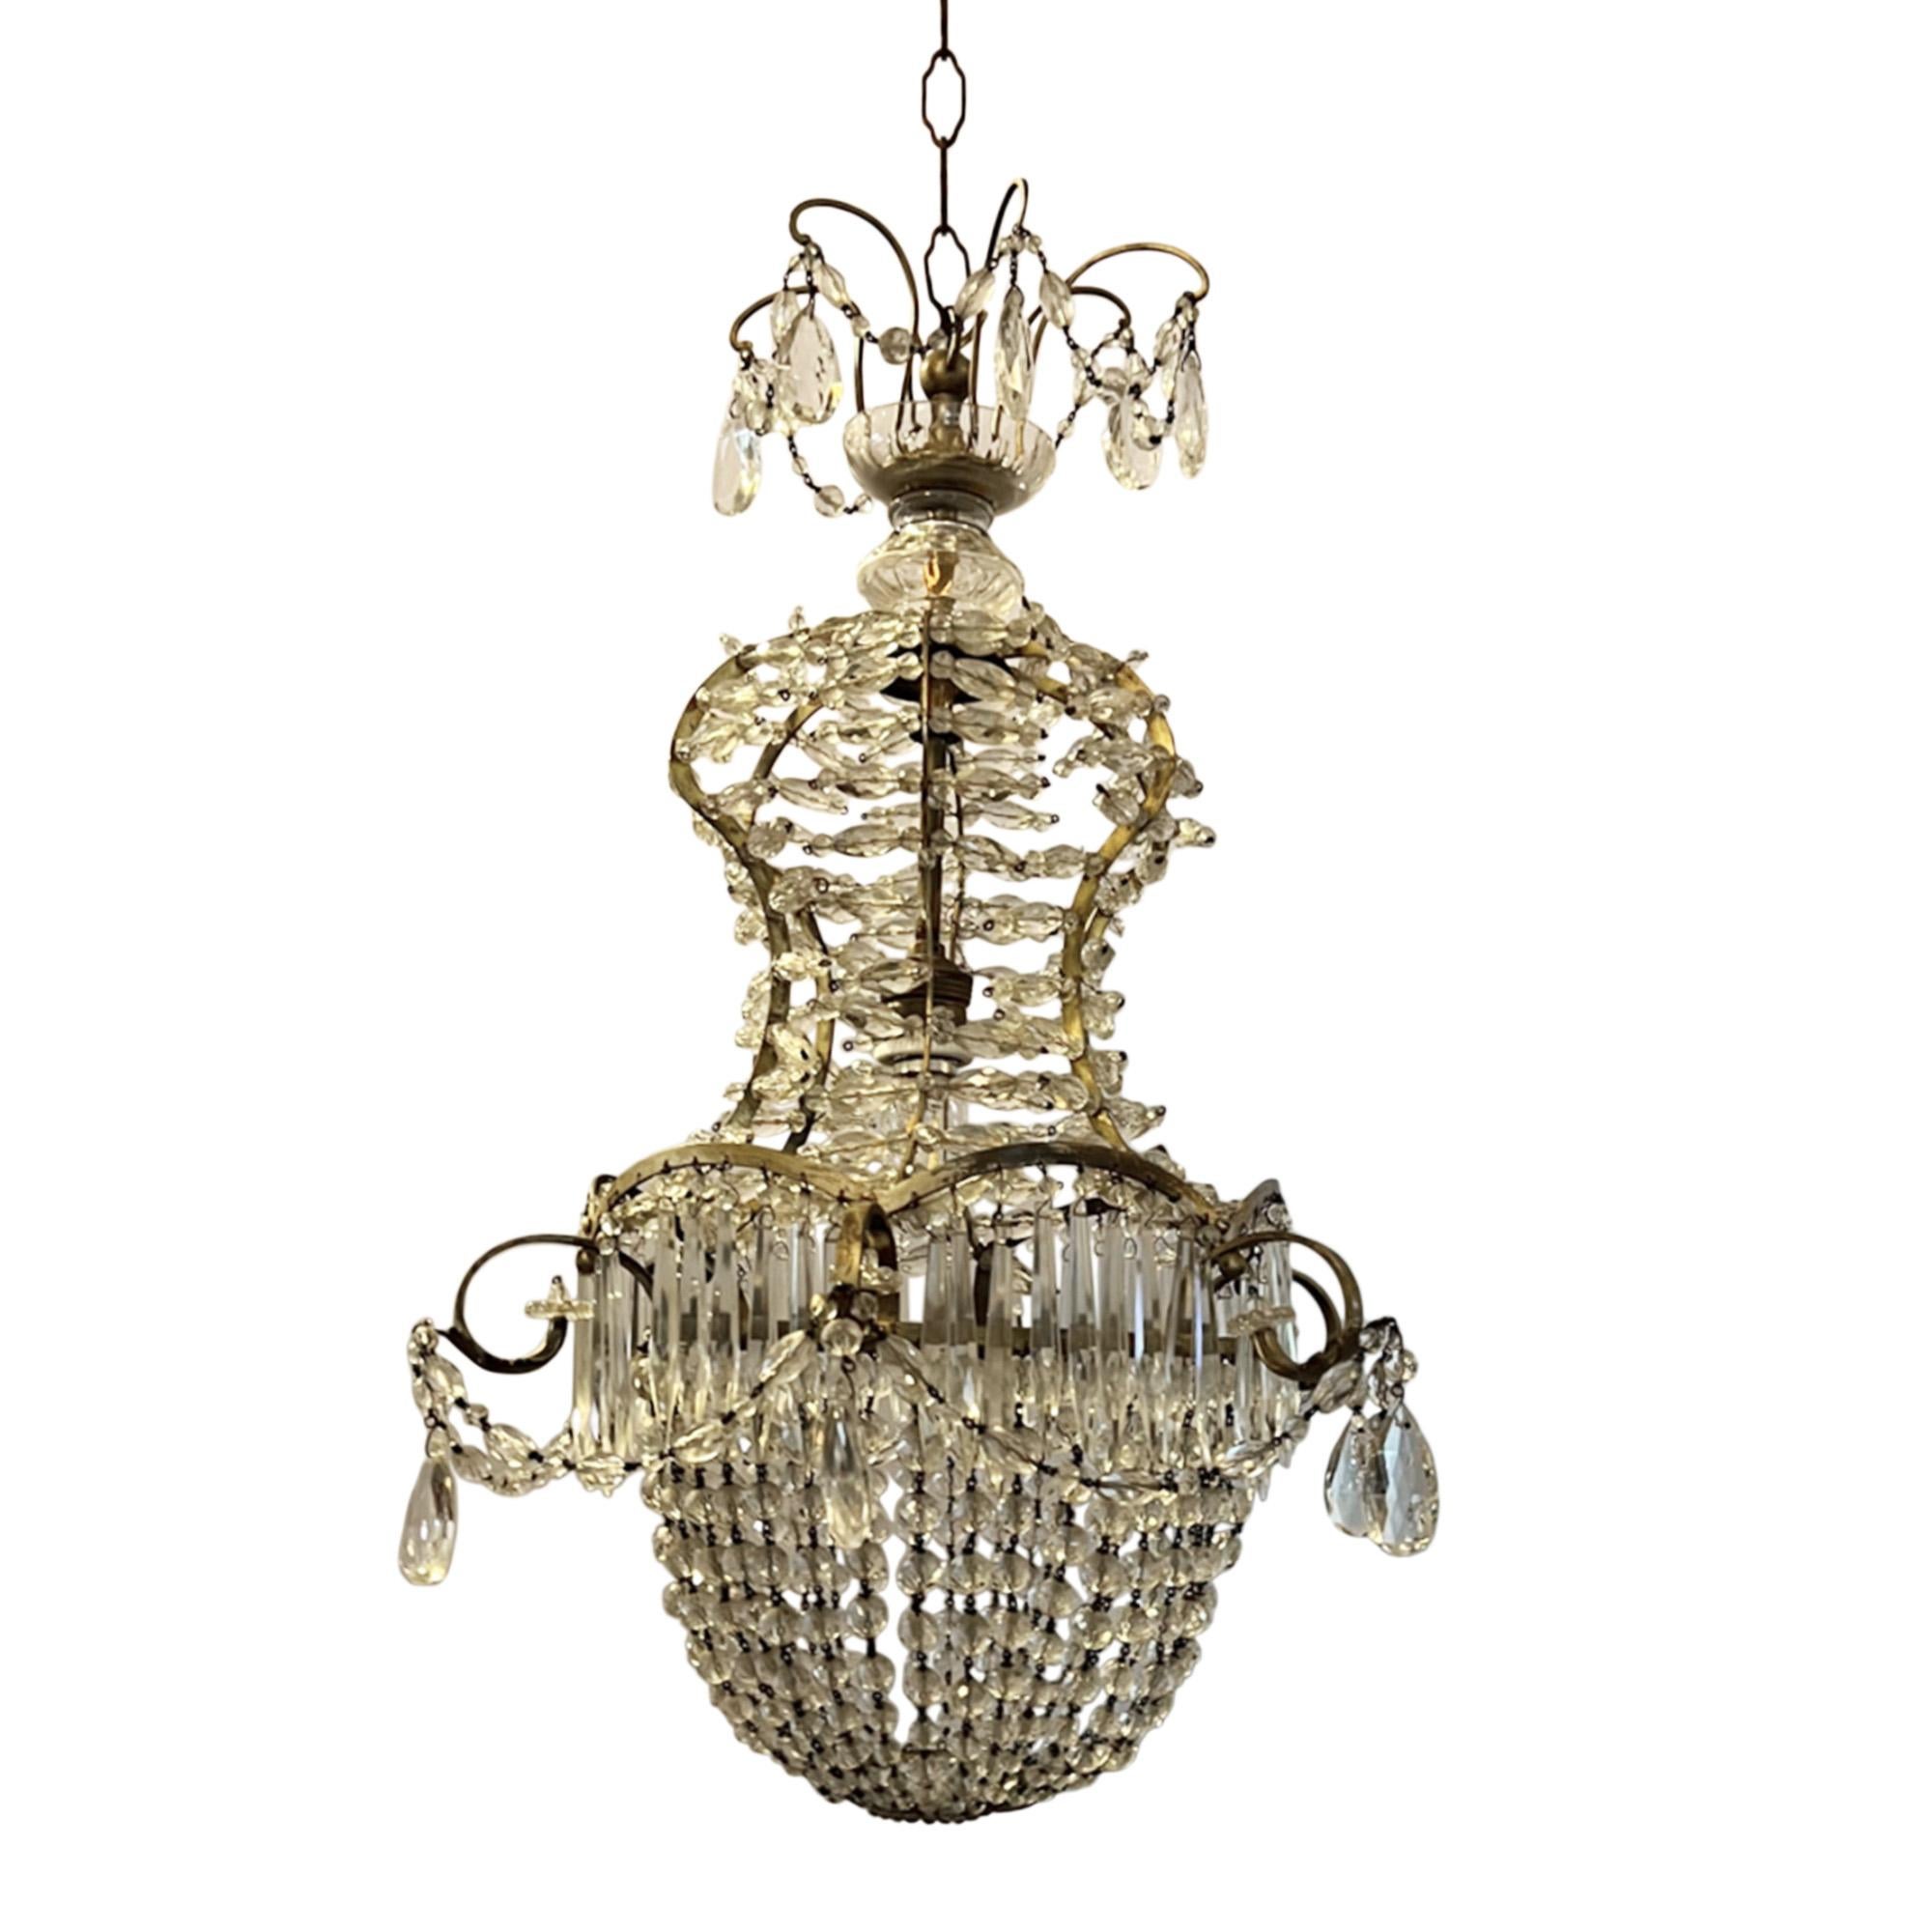 This is a lovely little basket chandelier was made in France in the 1950s.

An elegant design, with lots of detail. Please see the picture of the view from underneath - a great little crystal plaque!

Perfect for a hallway, or a smaller sitting